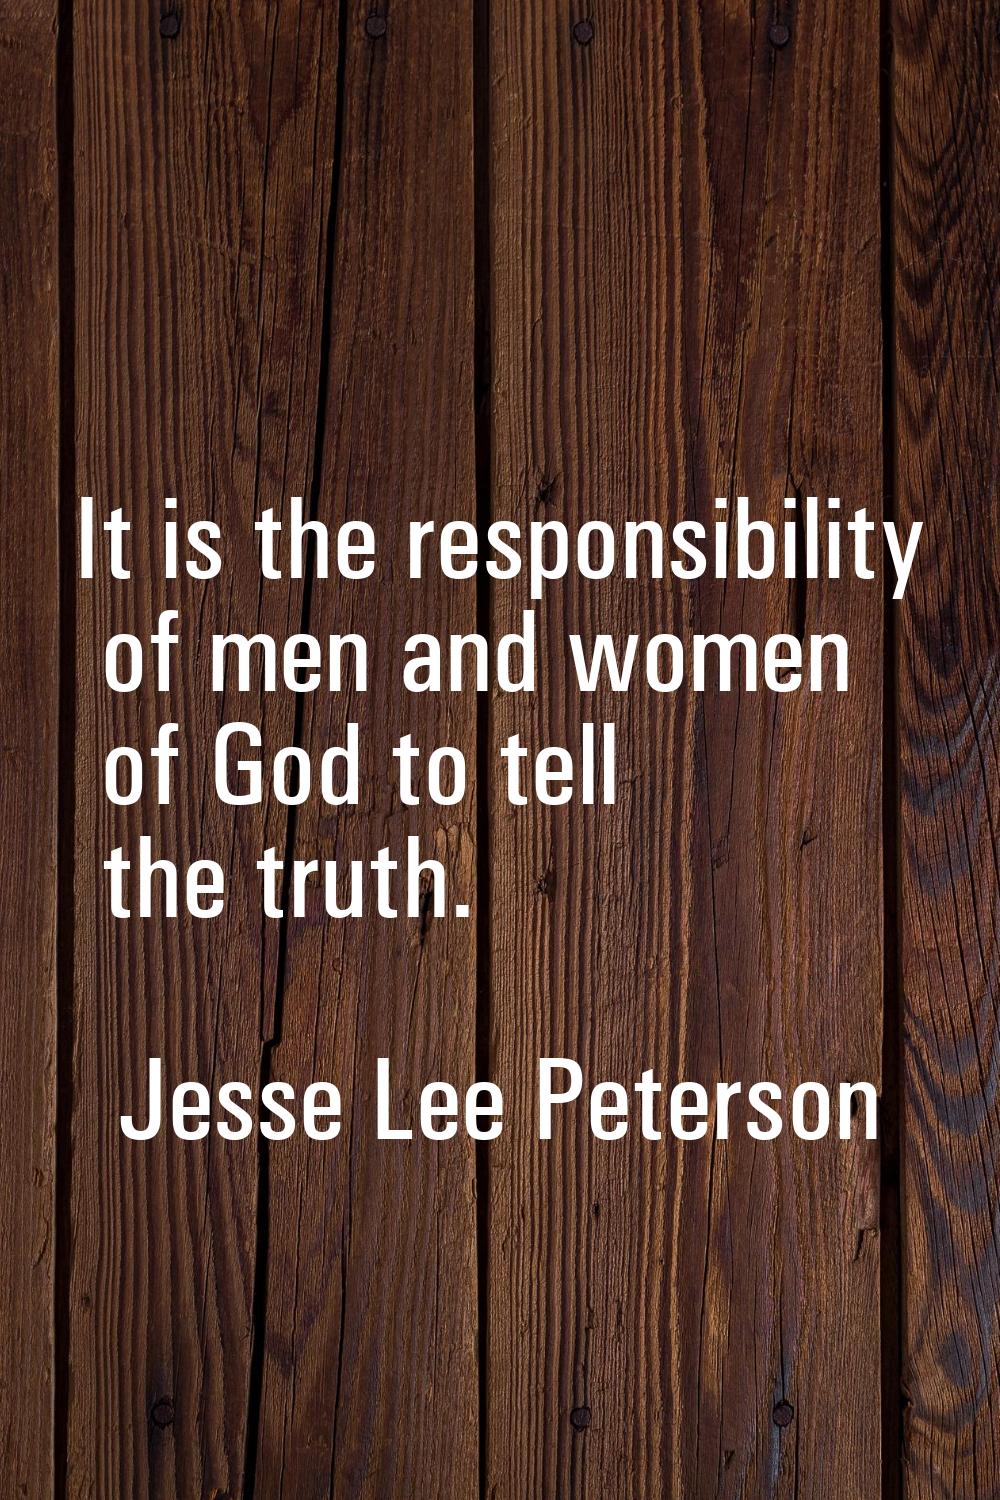 It is the responsibility of men and women of God to tell the truth.